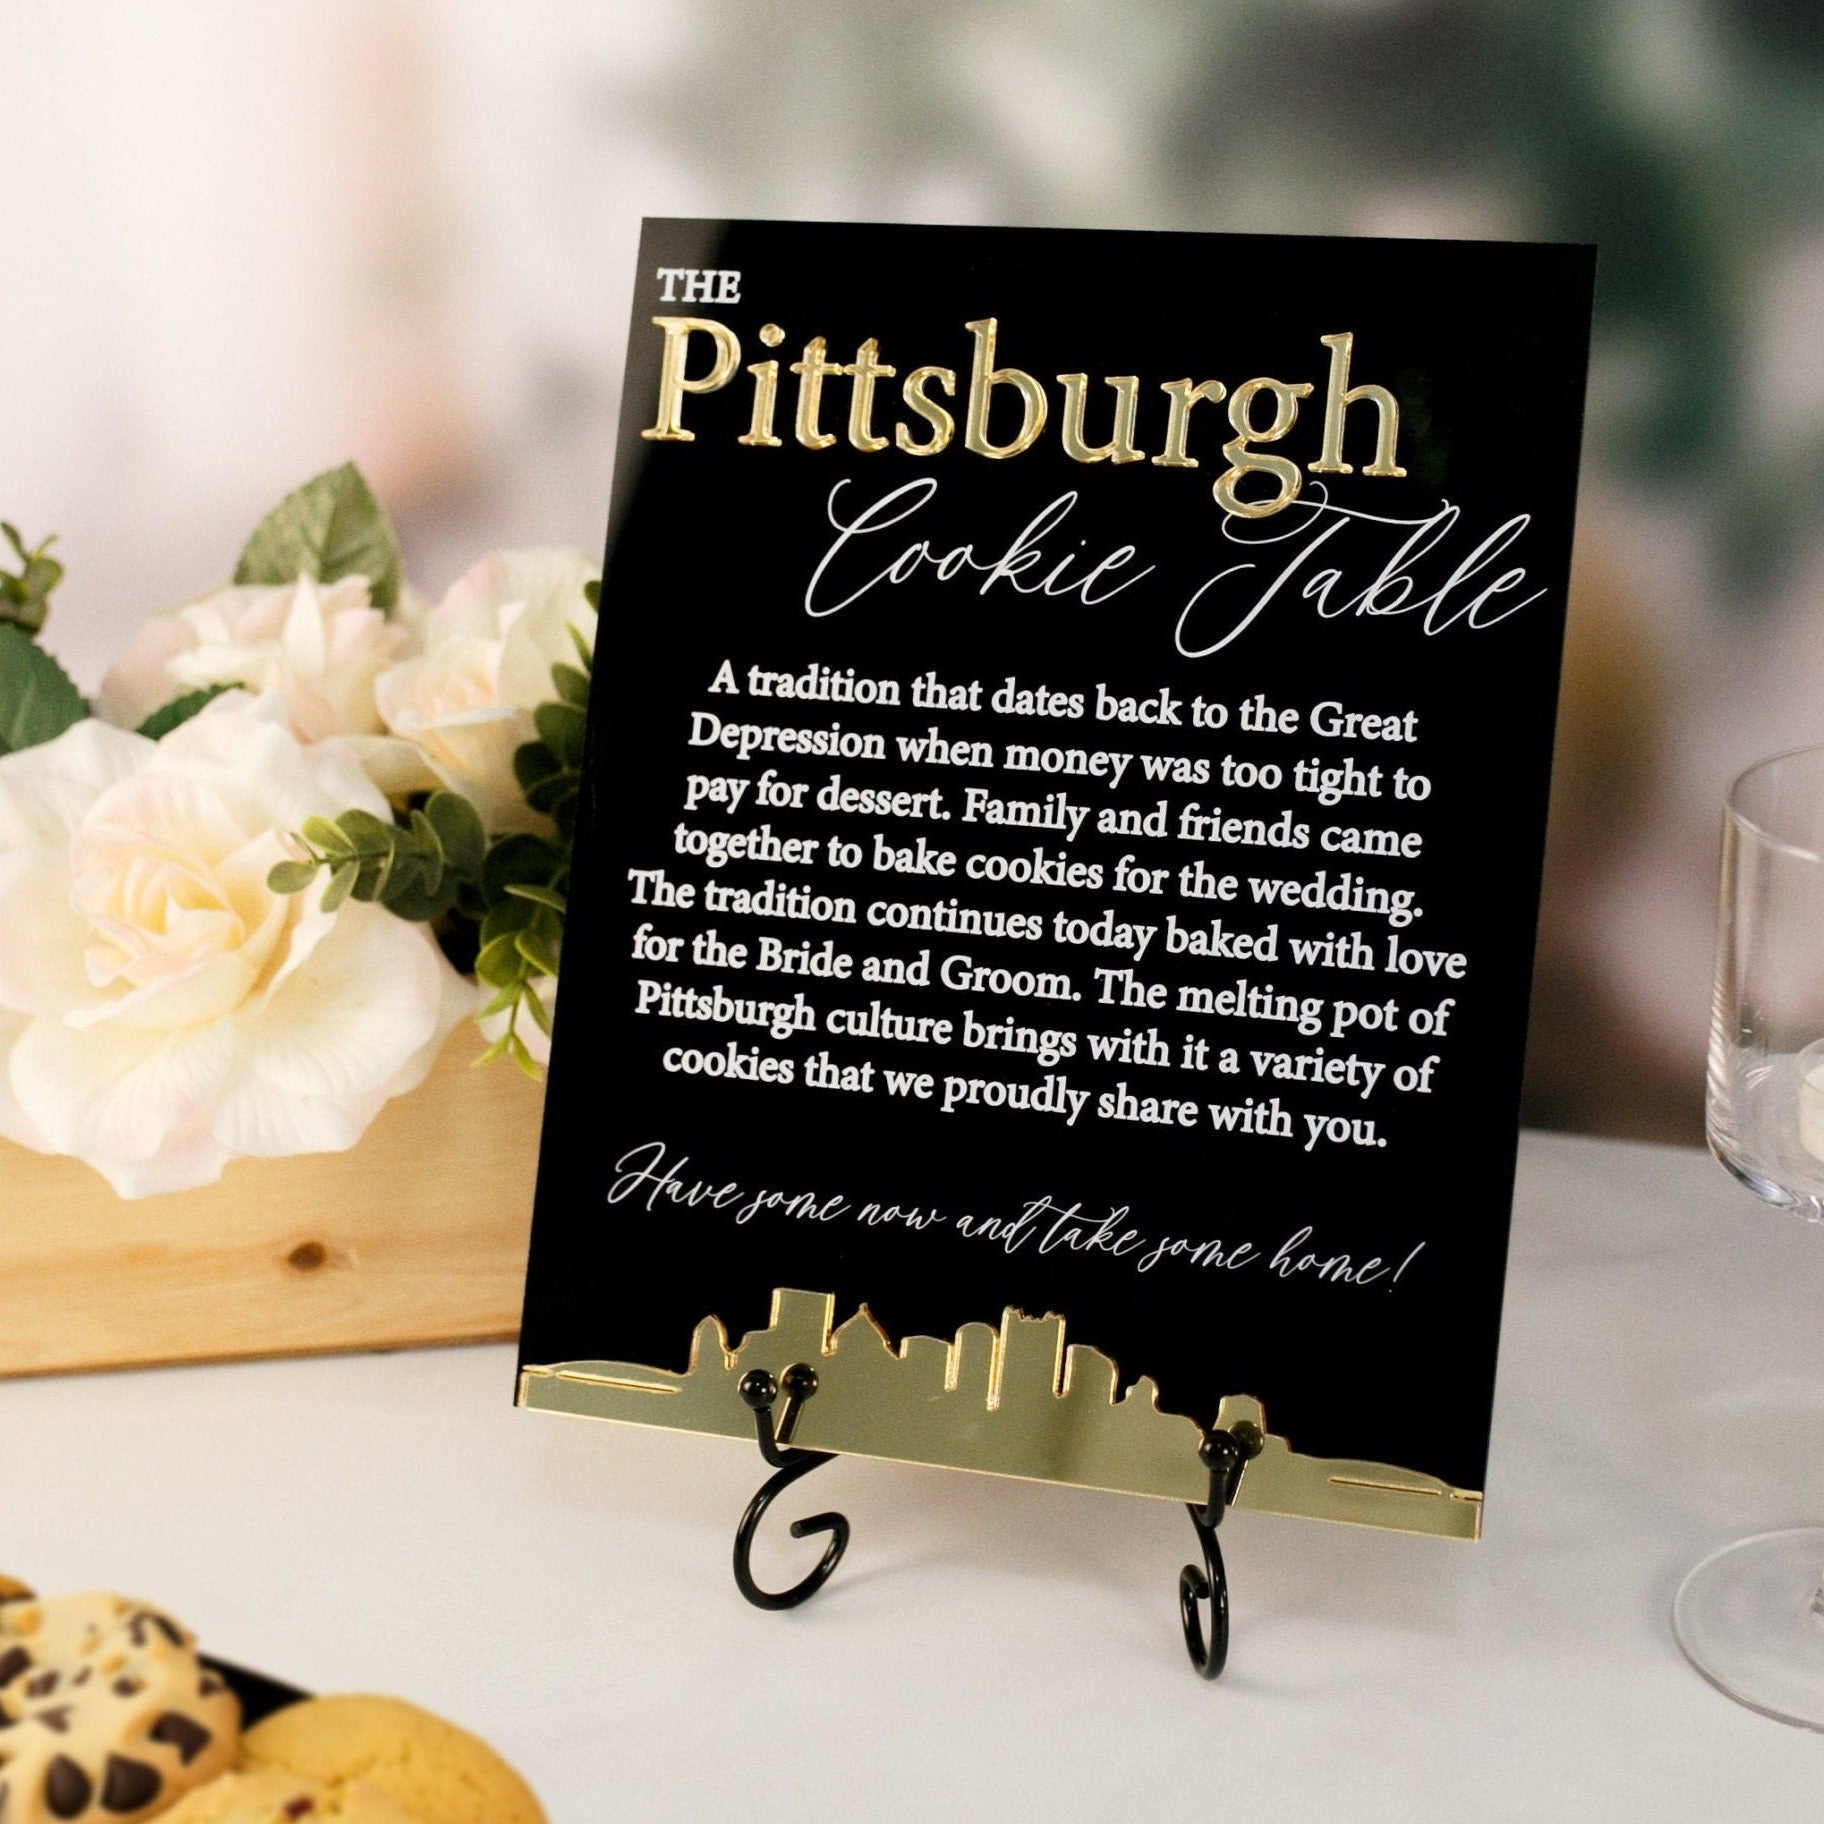 3D Mirror Pittsburgh Cookie Table Tradition Favors Clear Glass Look Acrylic Wedding Sign All of Yinz Skyline Perspex Cookies Table Sign